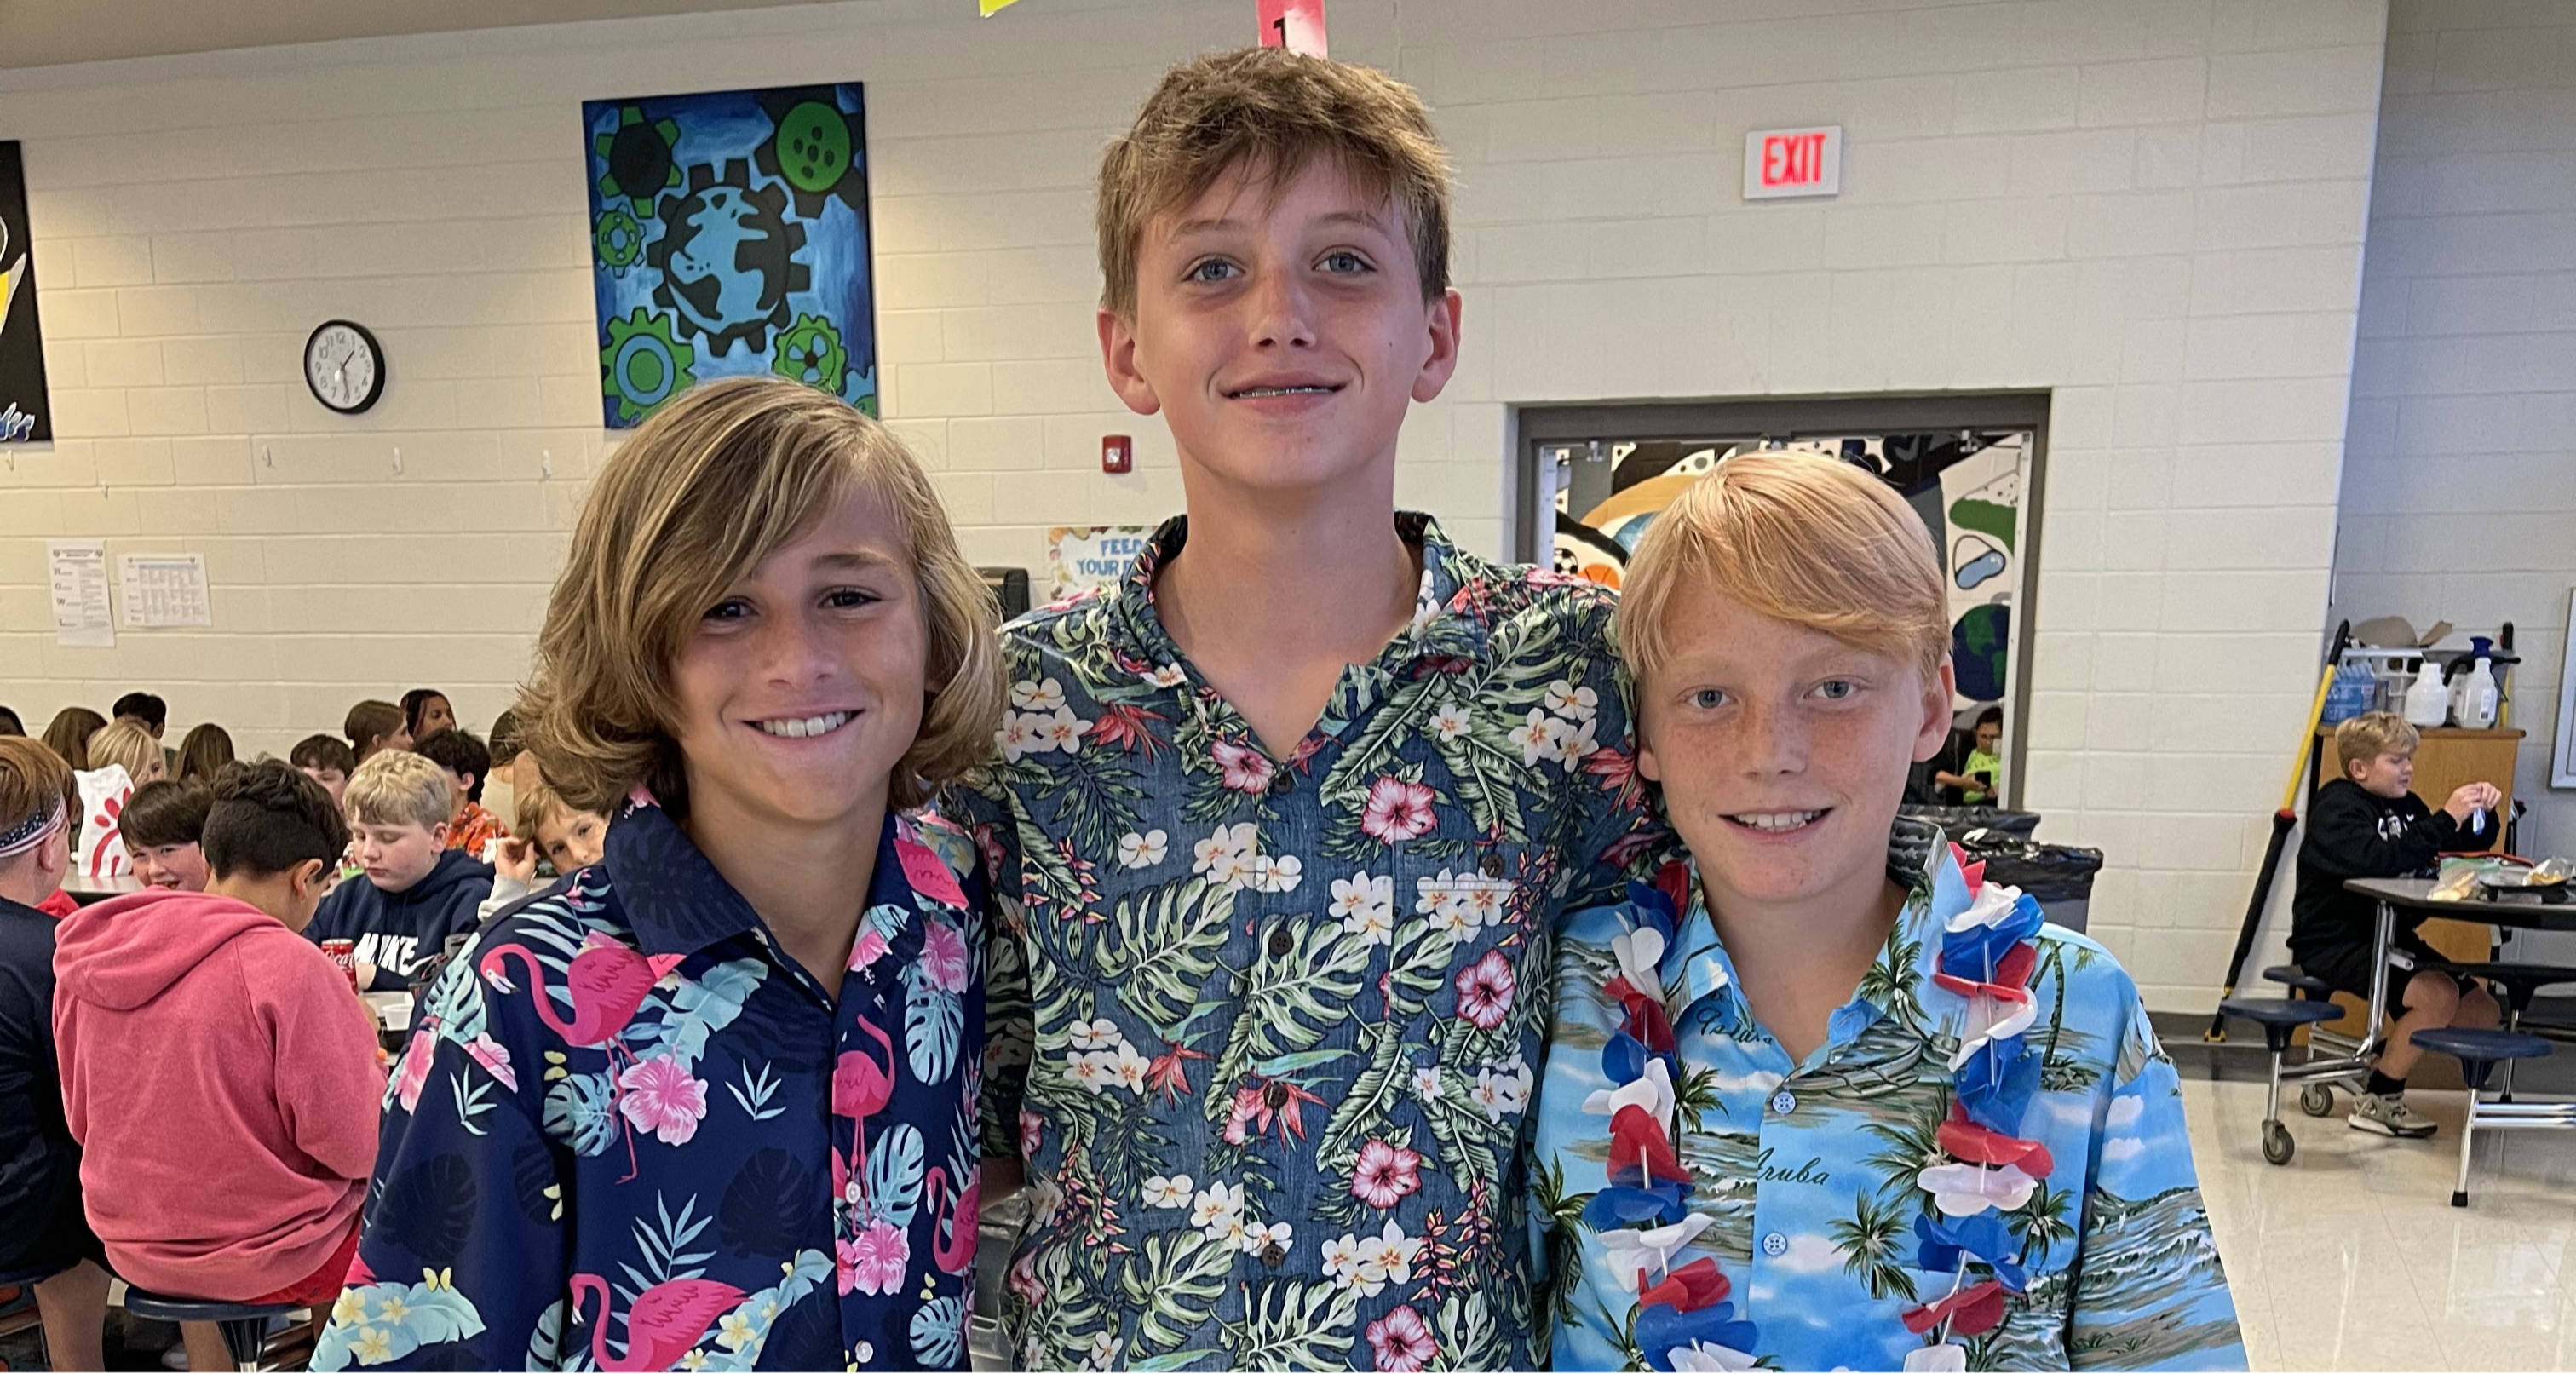 Three boys wearing floral shirts pose for a photo together